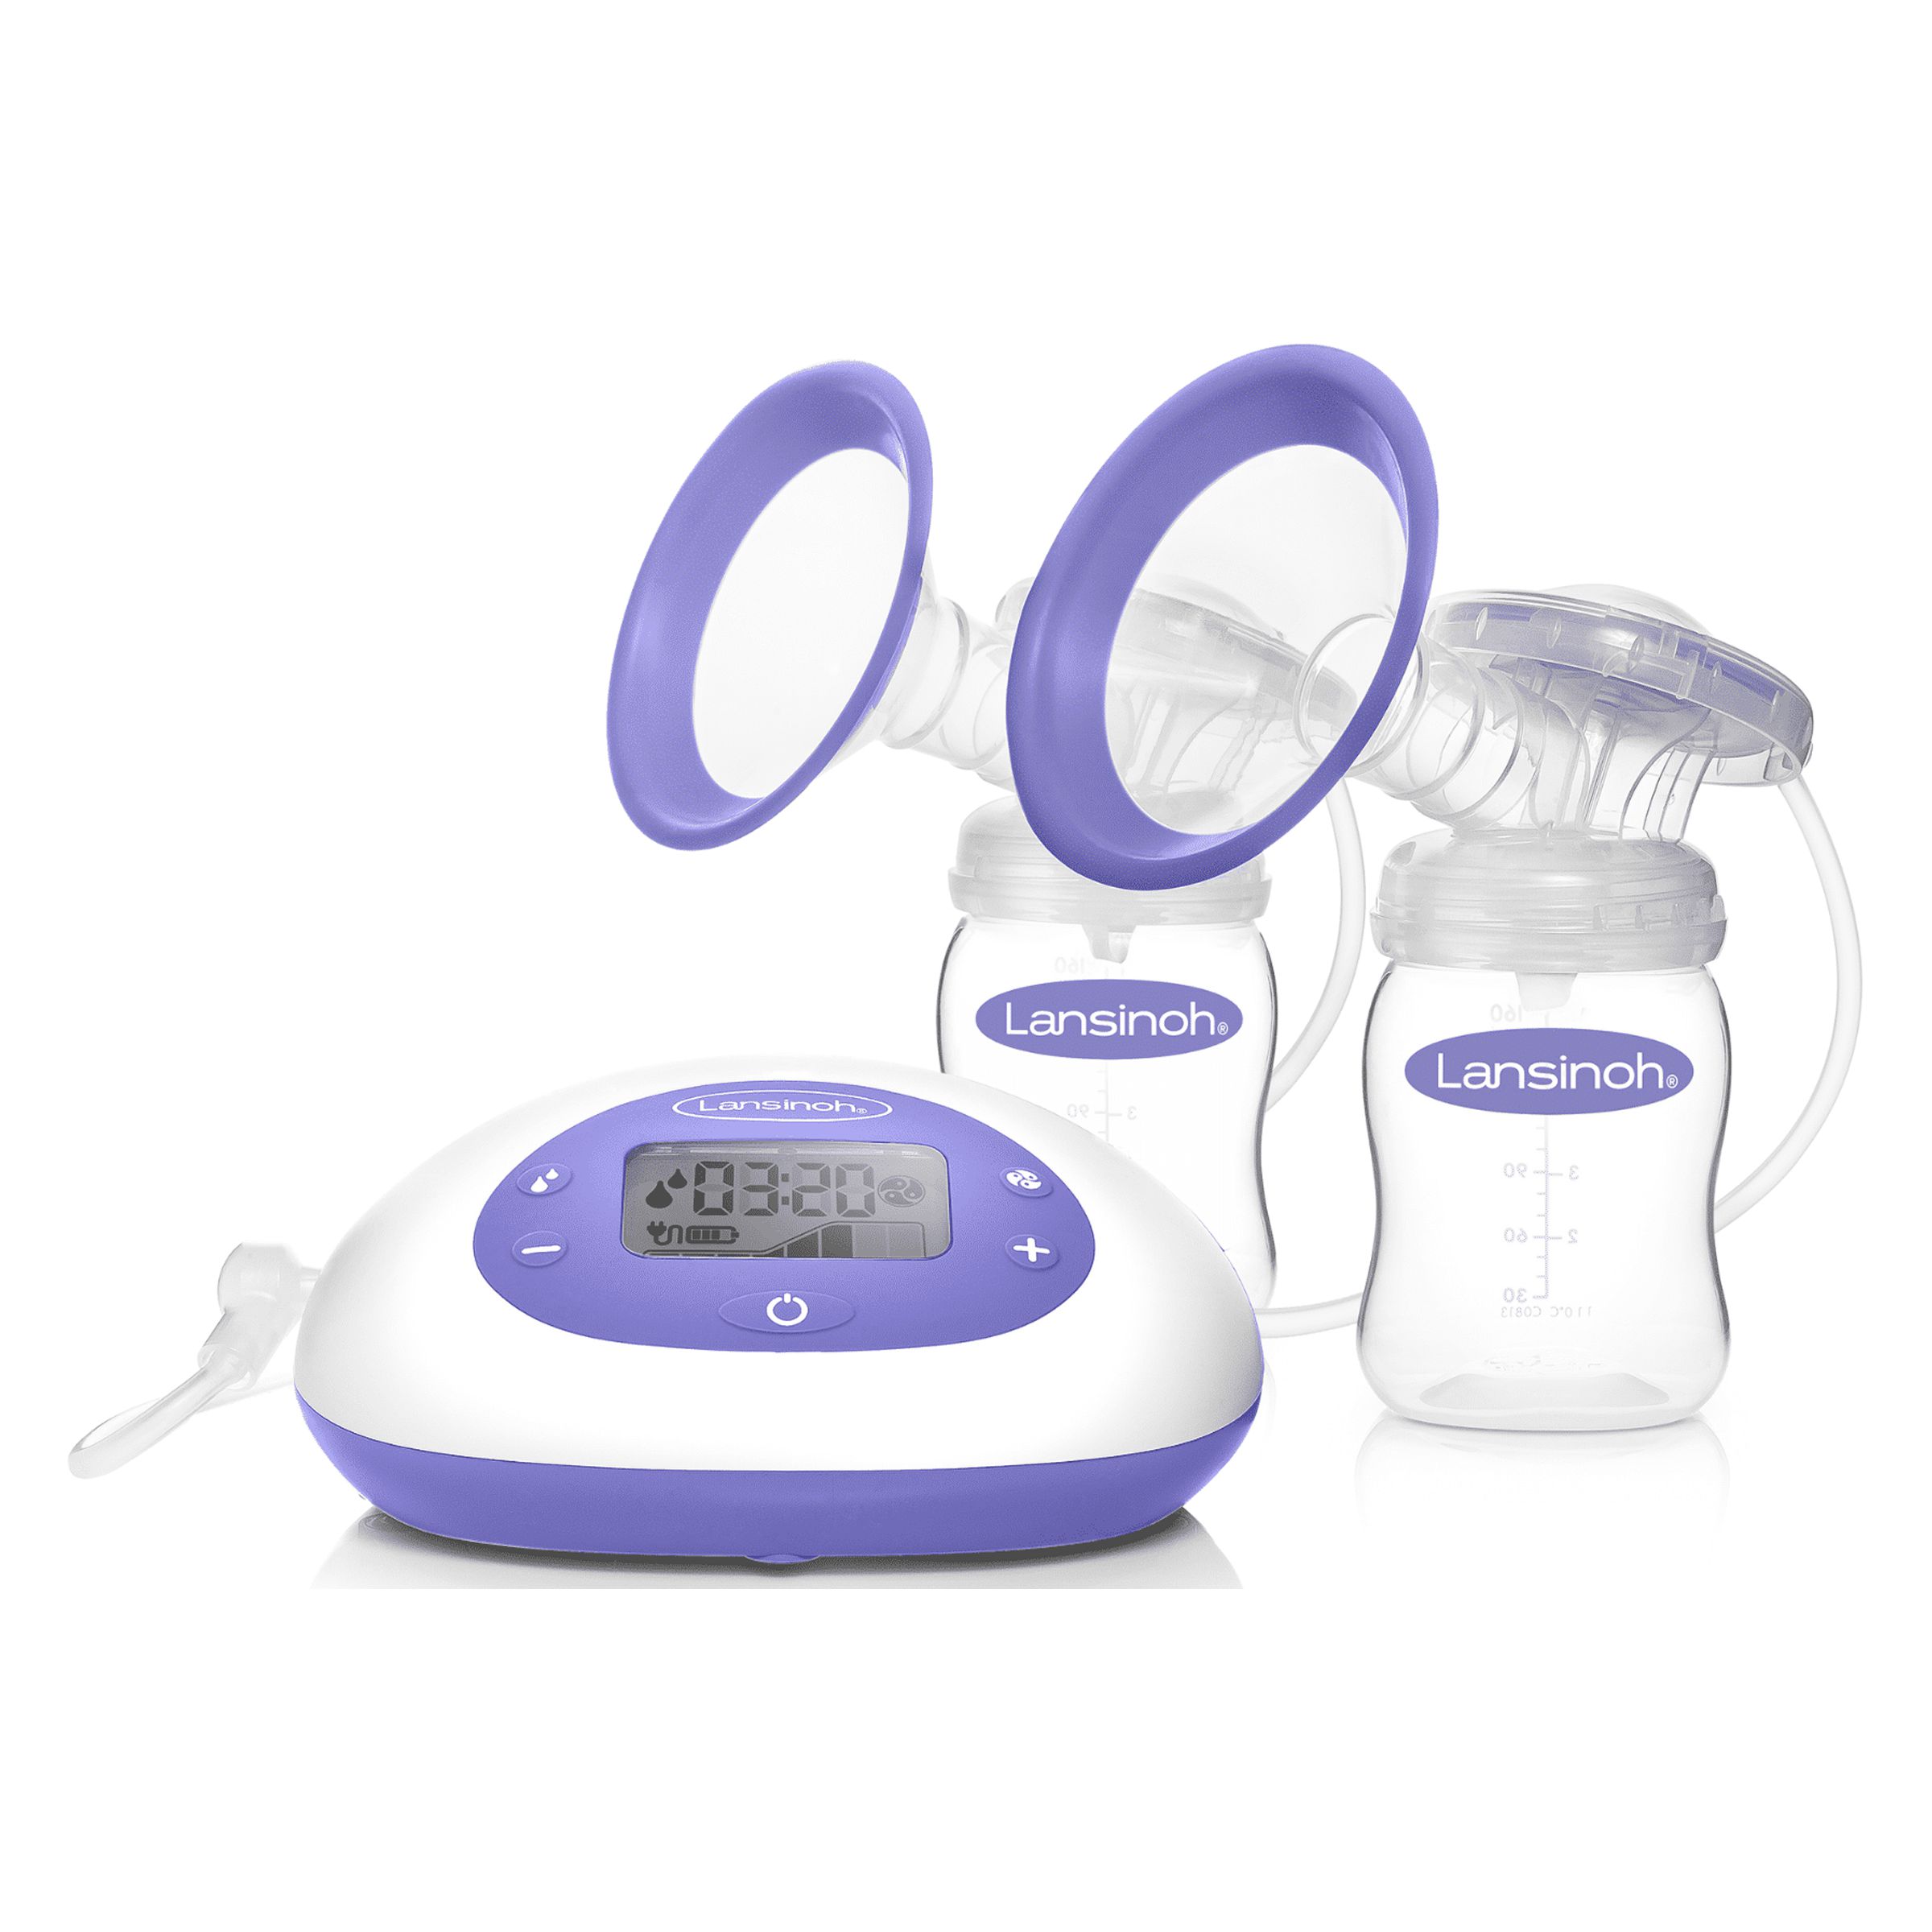 Lansinoh Signature Pro Double Electric Breast Pump - image 1 of 9